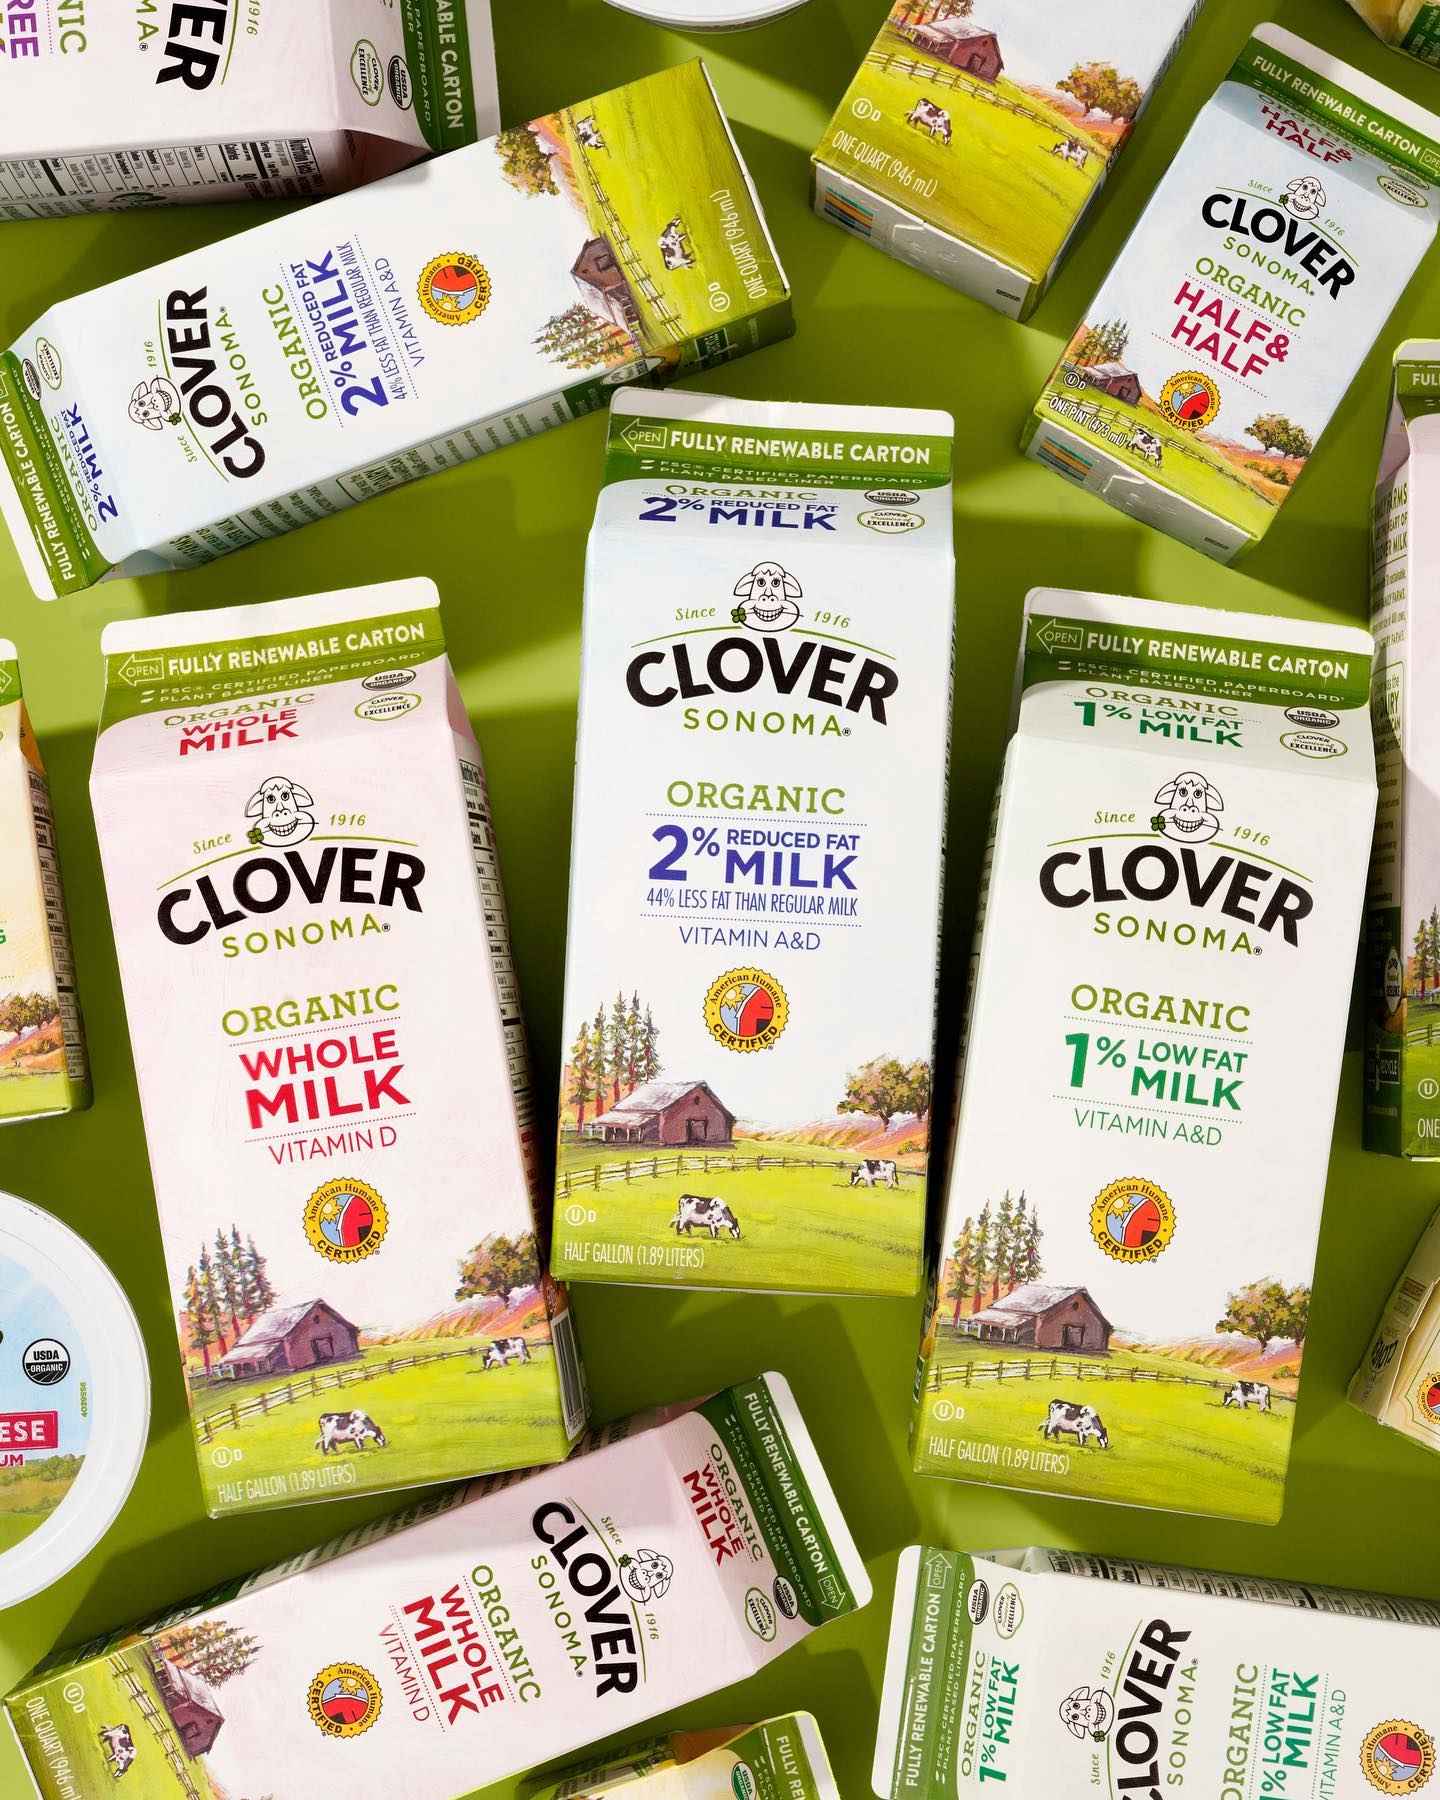 The organic crew is all here! 🥛 Which one are you enjoying today? 👇

🤍 Organic Whole Milk
🐄 Organic 2% Reduced Fat Milk
✨ Organic 1% Low Fat Milk
☕️ Organic Half & Half